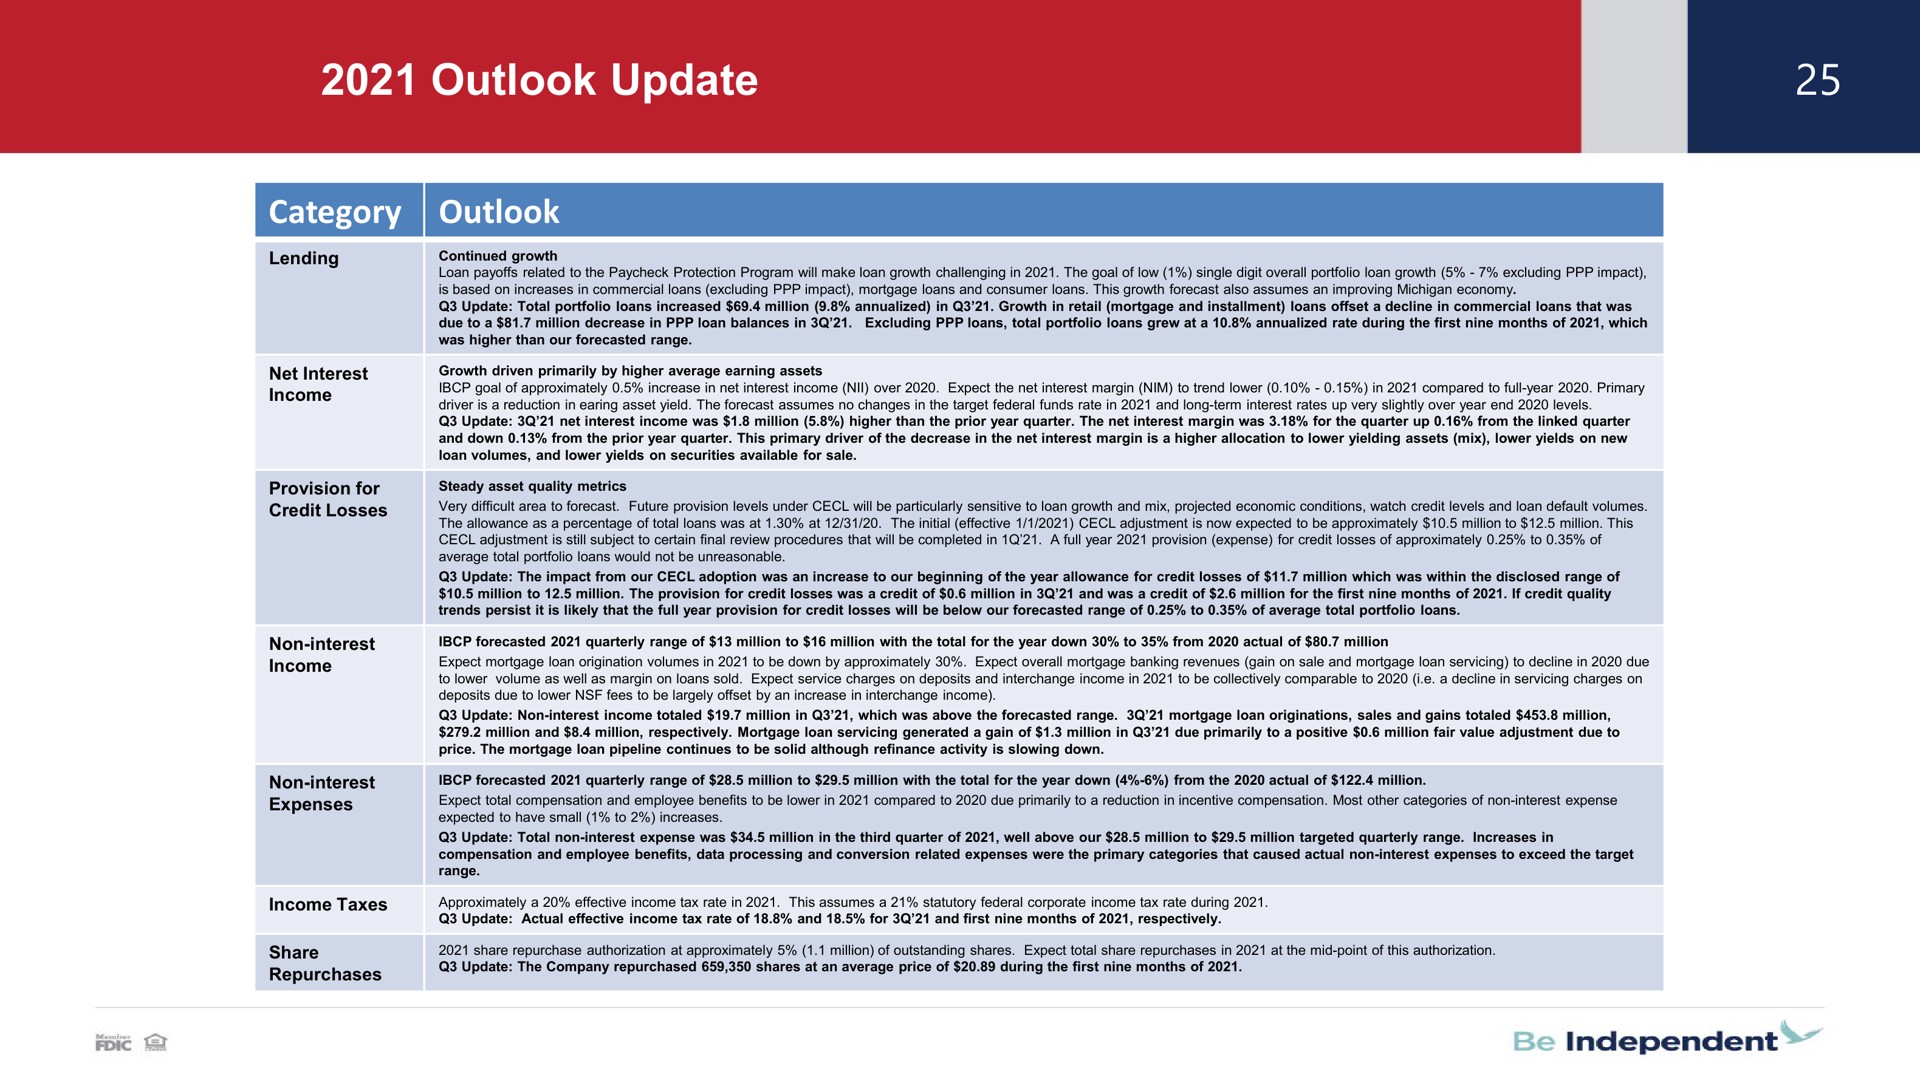 outlook update category outlook | Independent Bank Corp